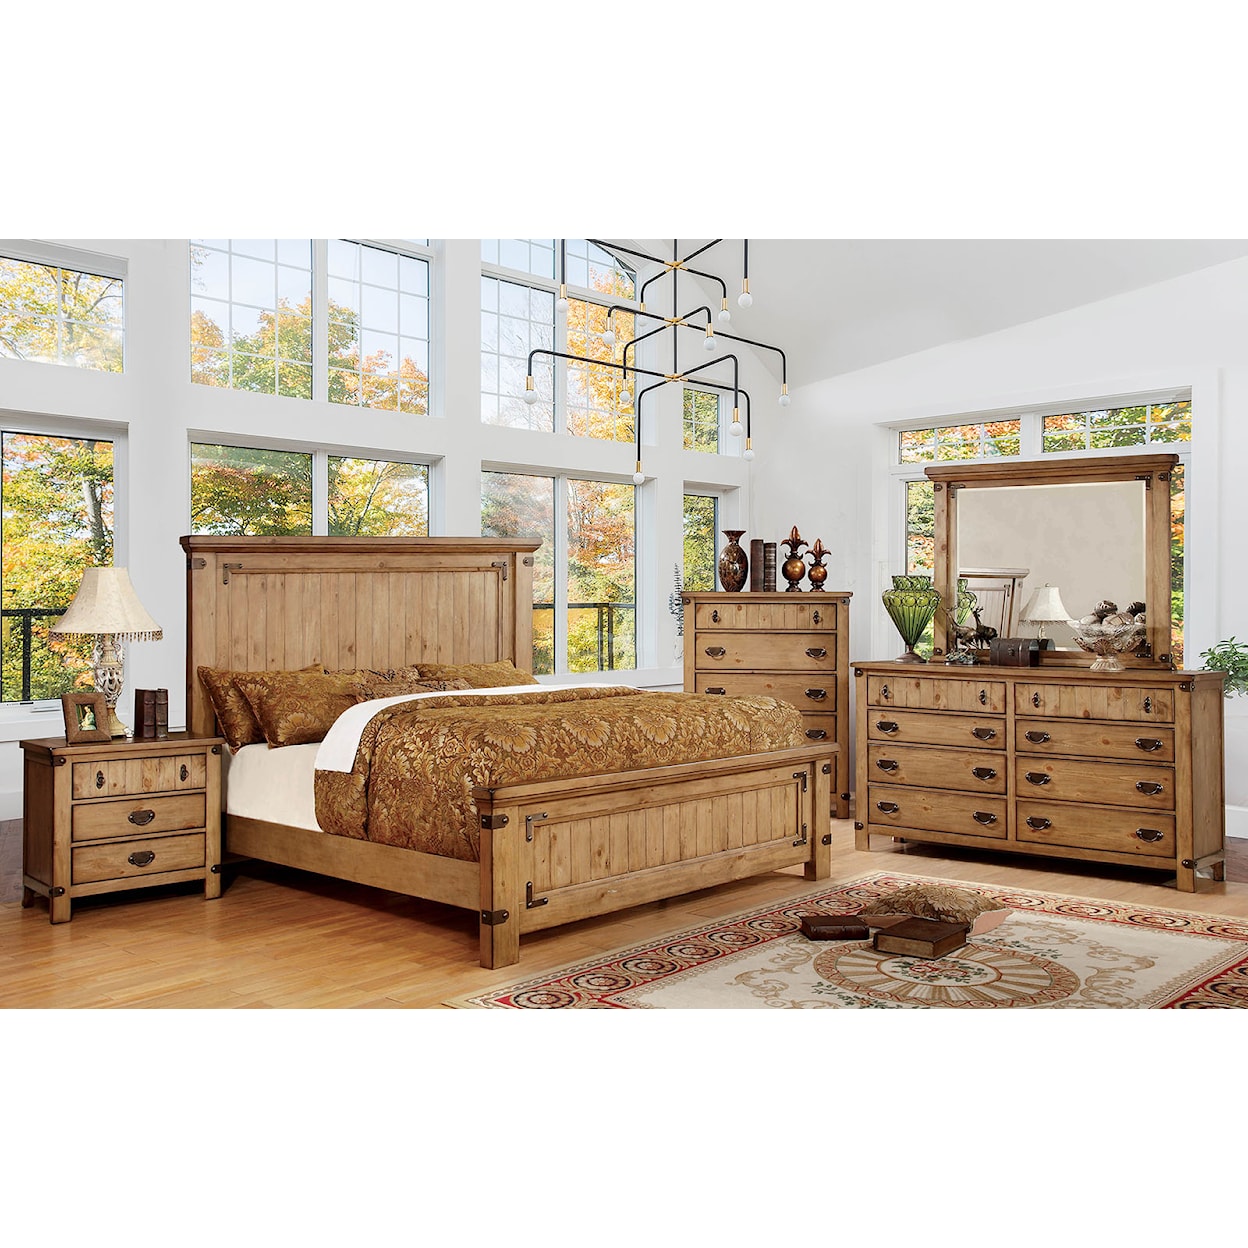 Furniture of America Carlsbad 5-Piece Bedroom Set with Chest